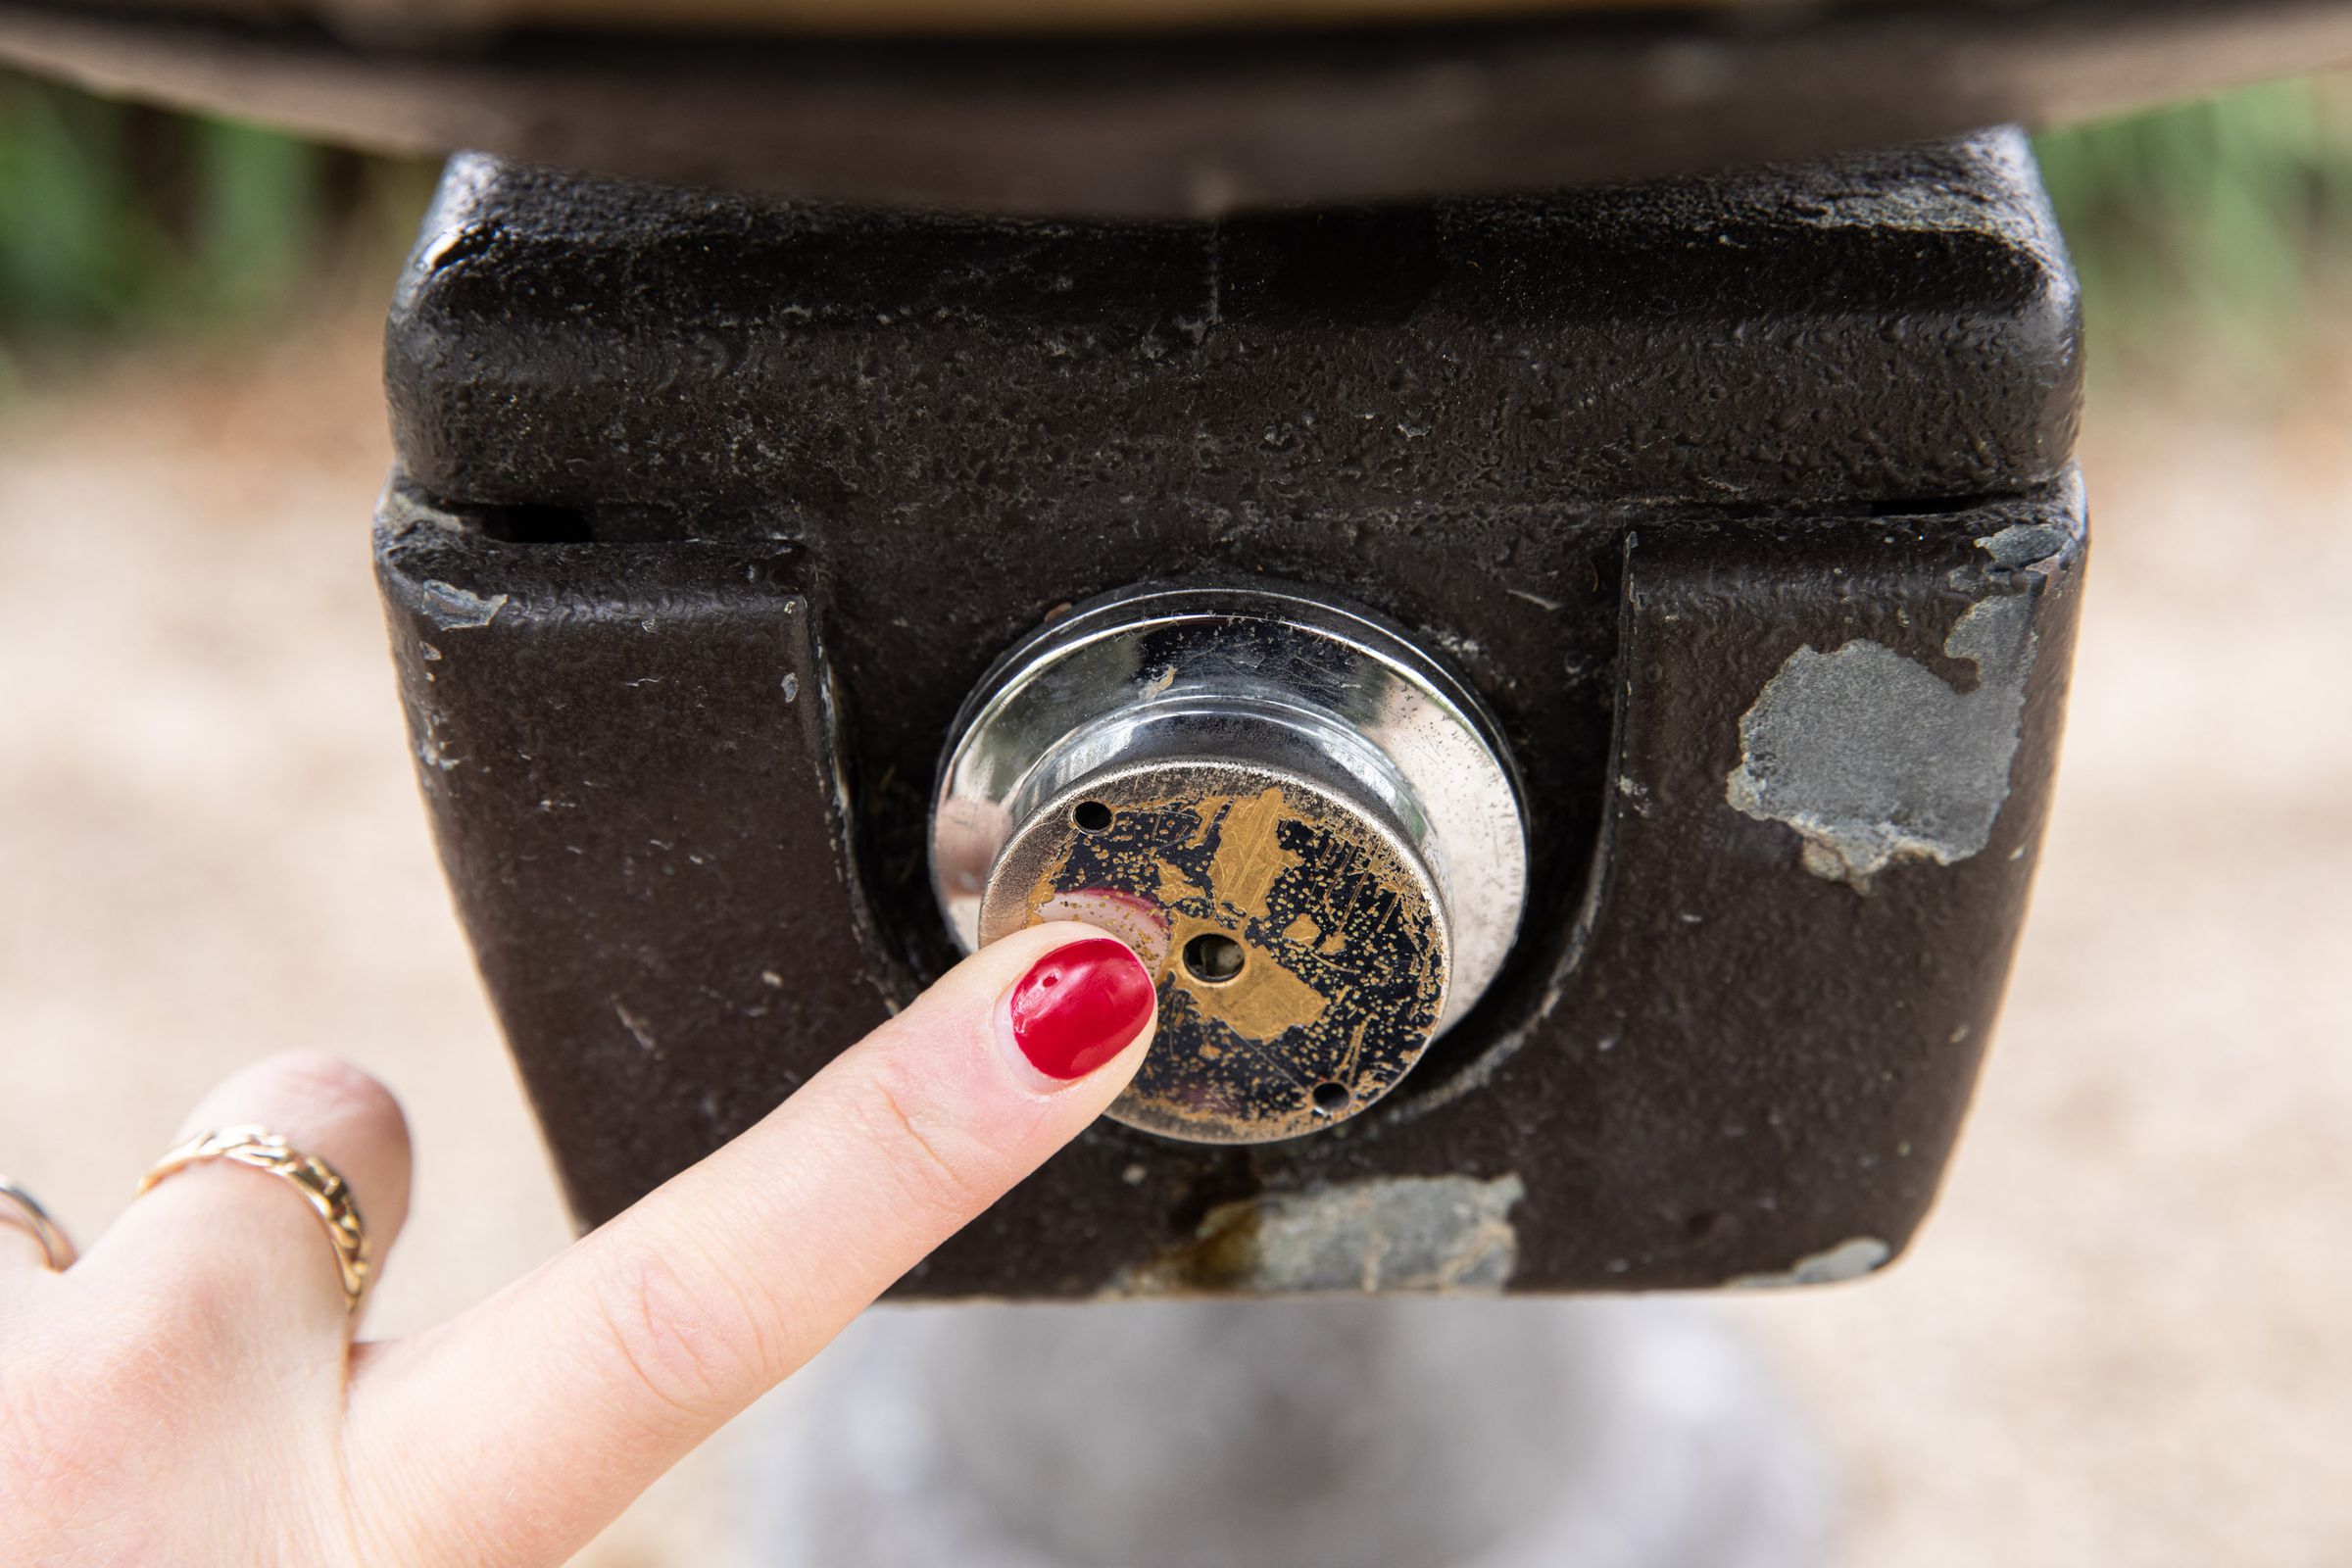 A finger with red nail polish presses a worn metal disc of a drinking fountain button with three holes